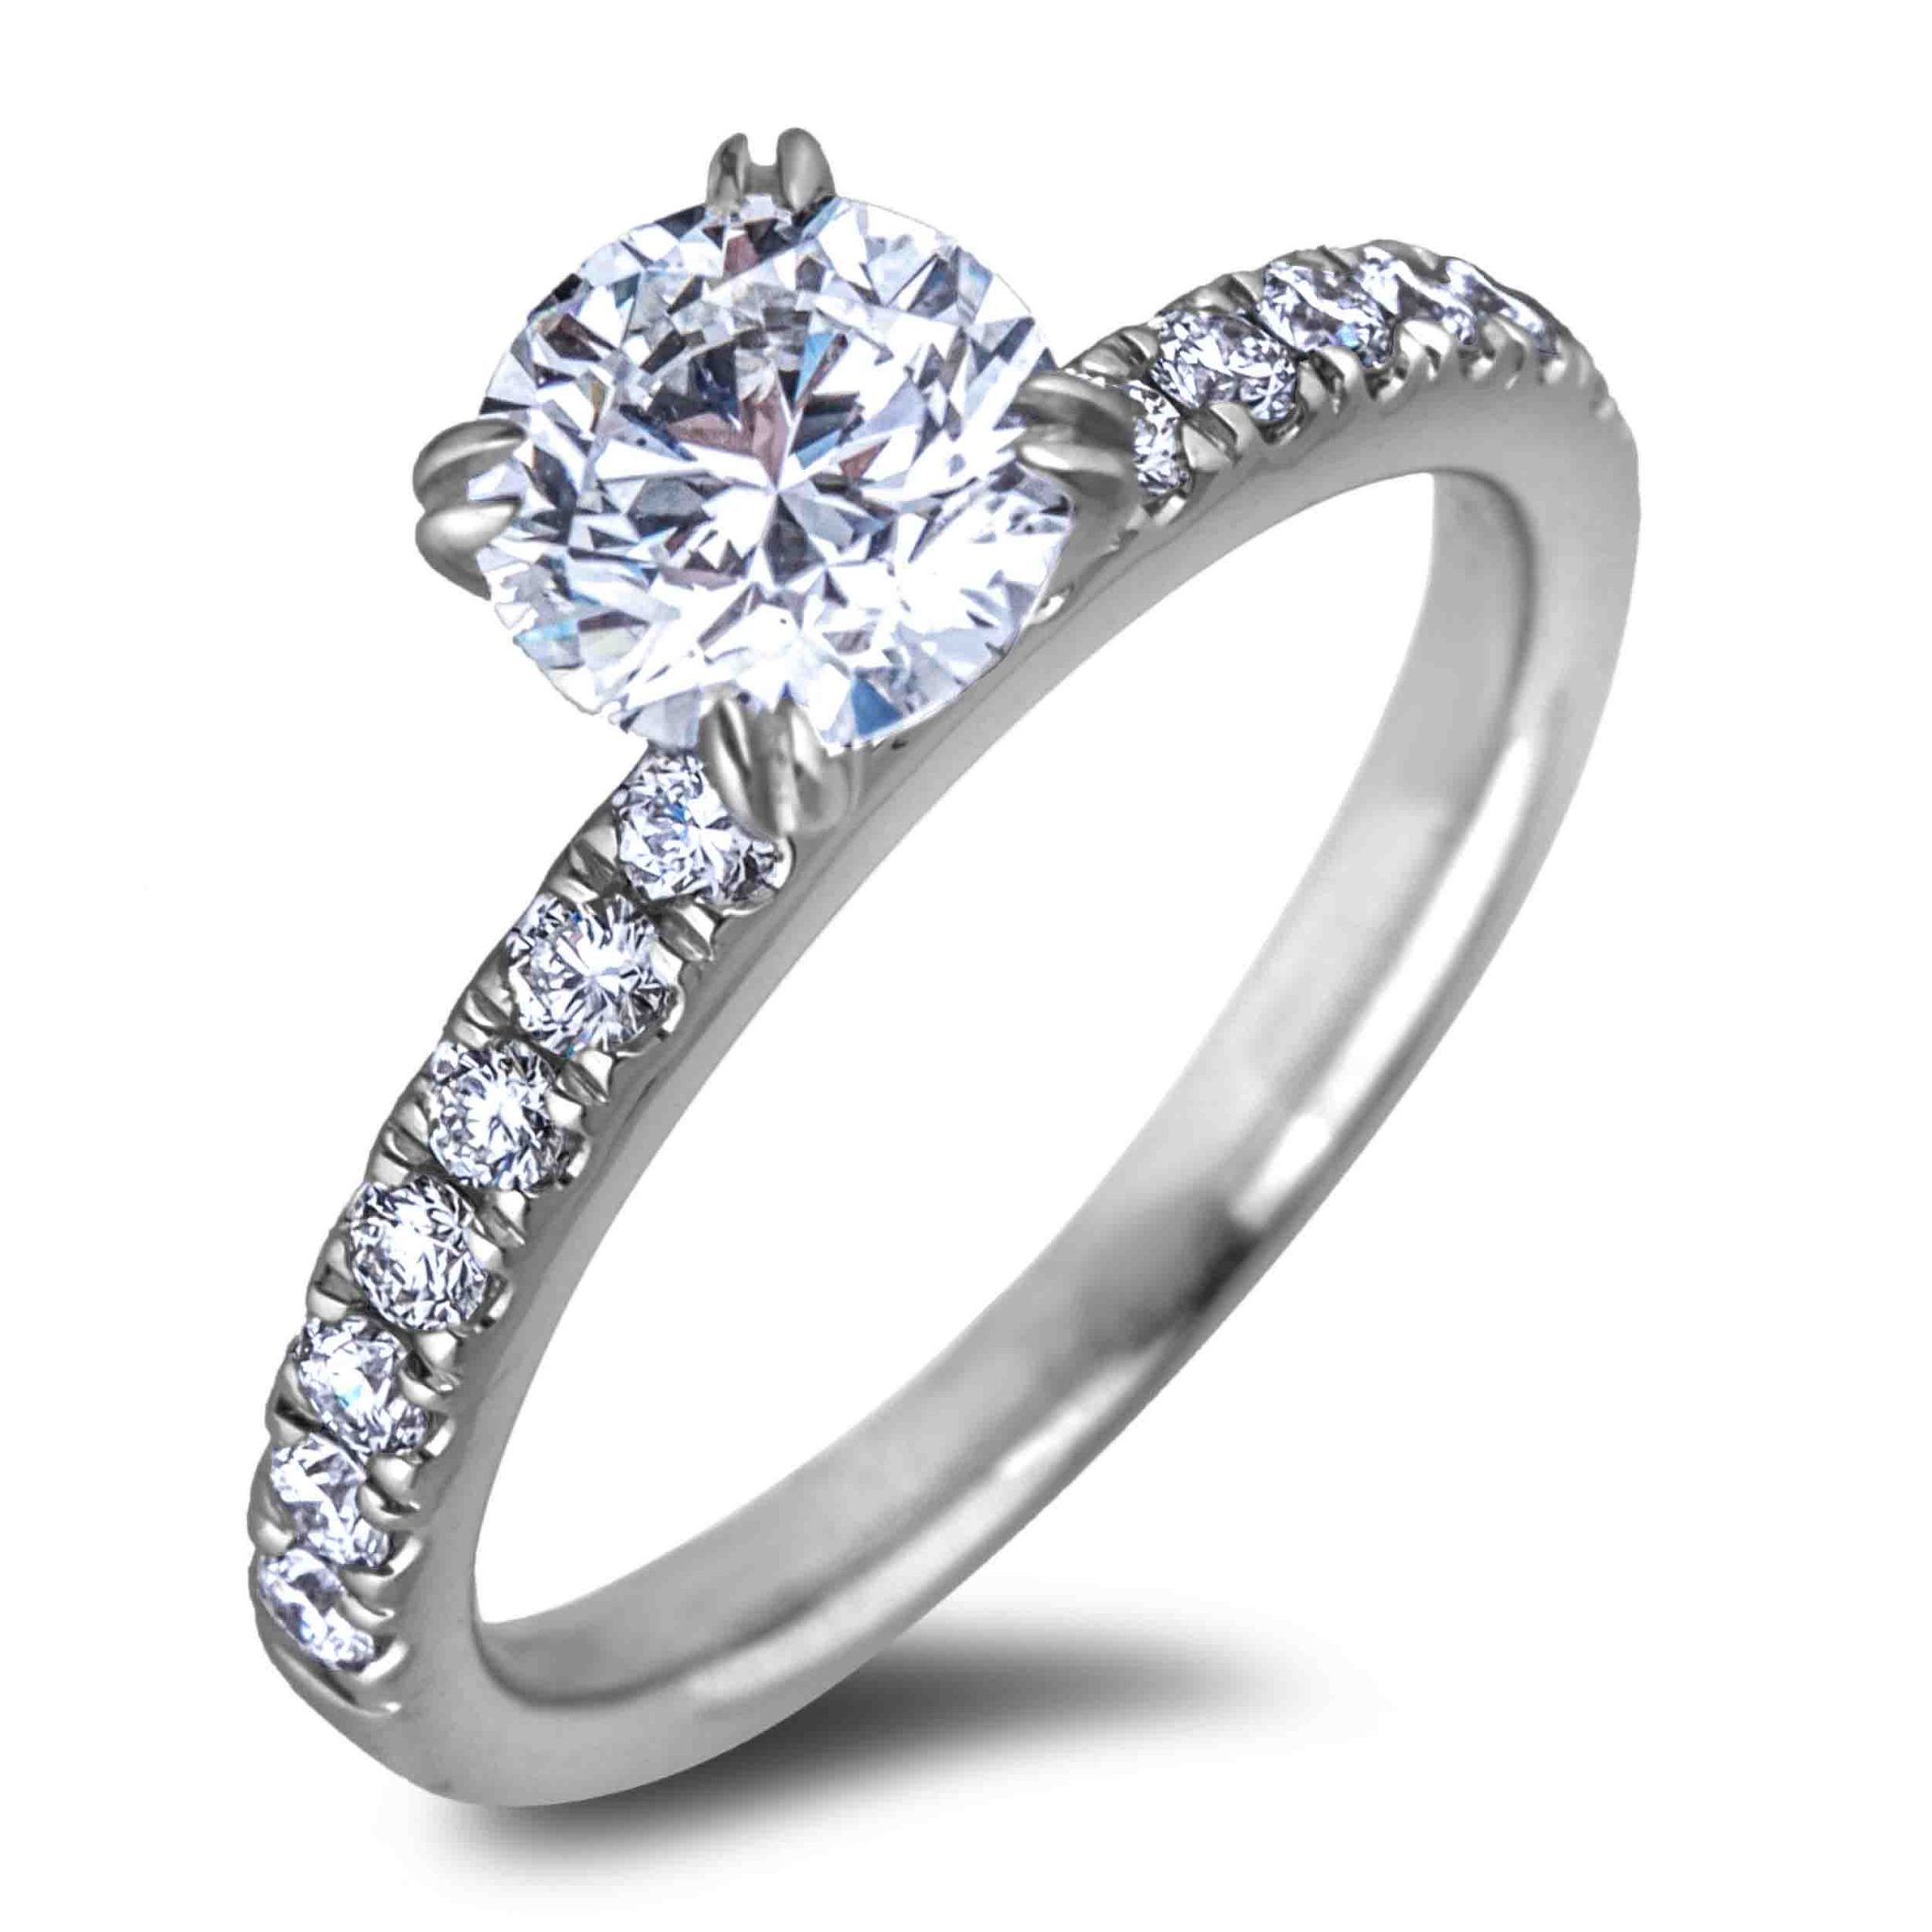 Learn More About Diamond 4C standard – Born to Blog